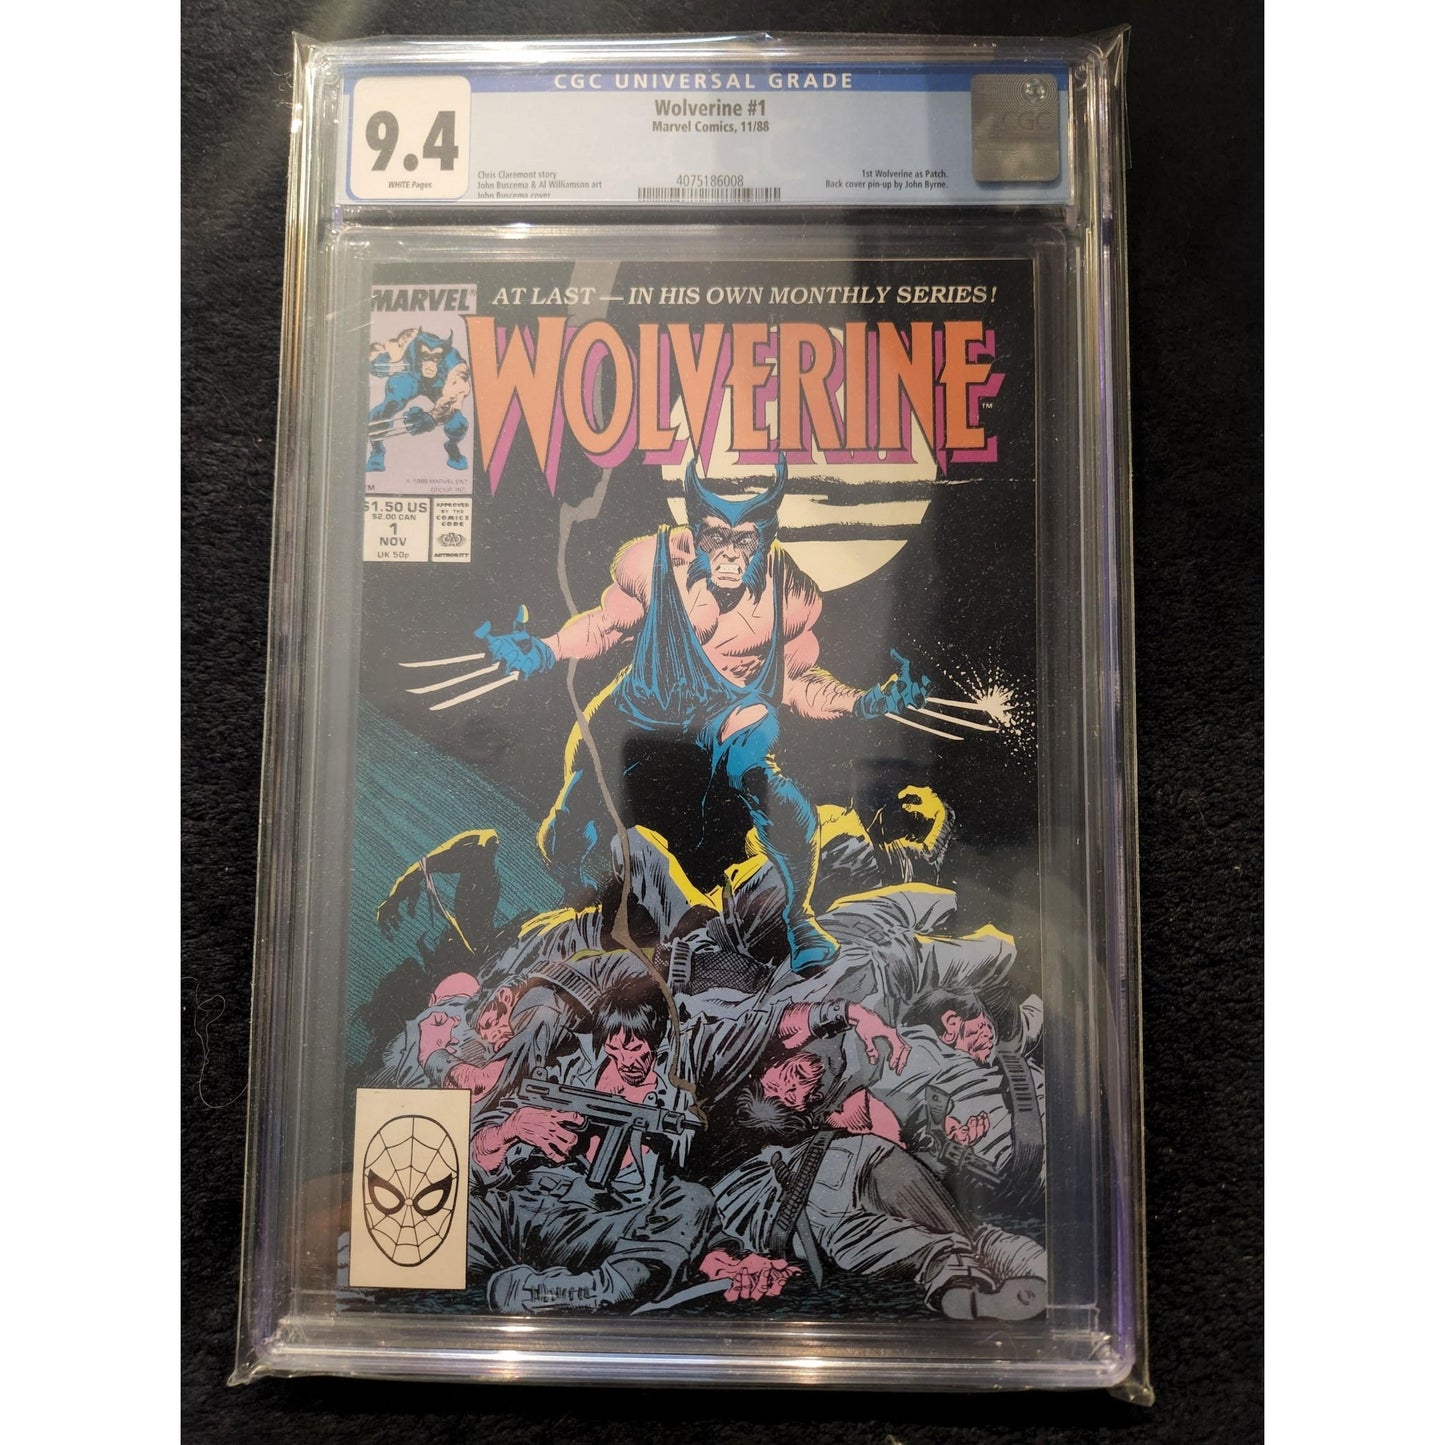 CGC Graded Wolverine #1 9.4 1st Wolverine As Patch - Redshift7toys.com